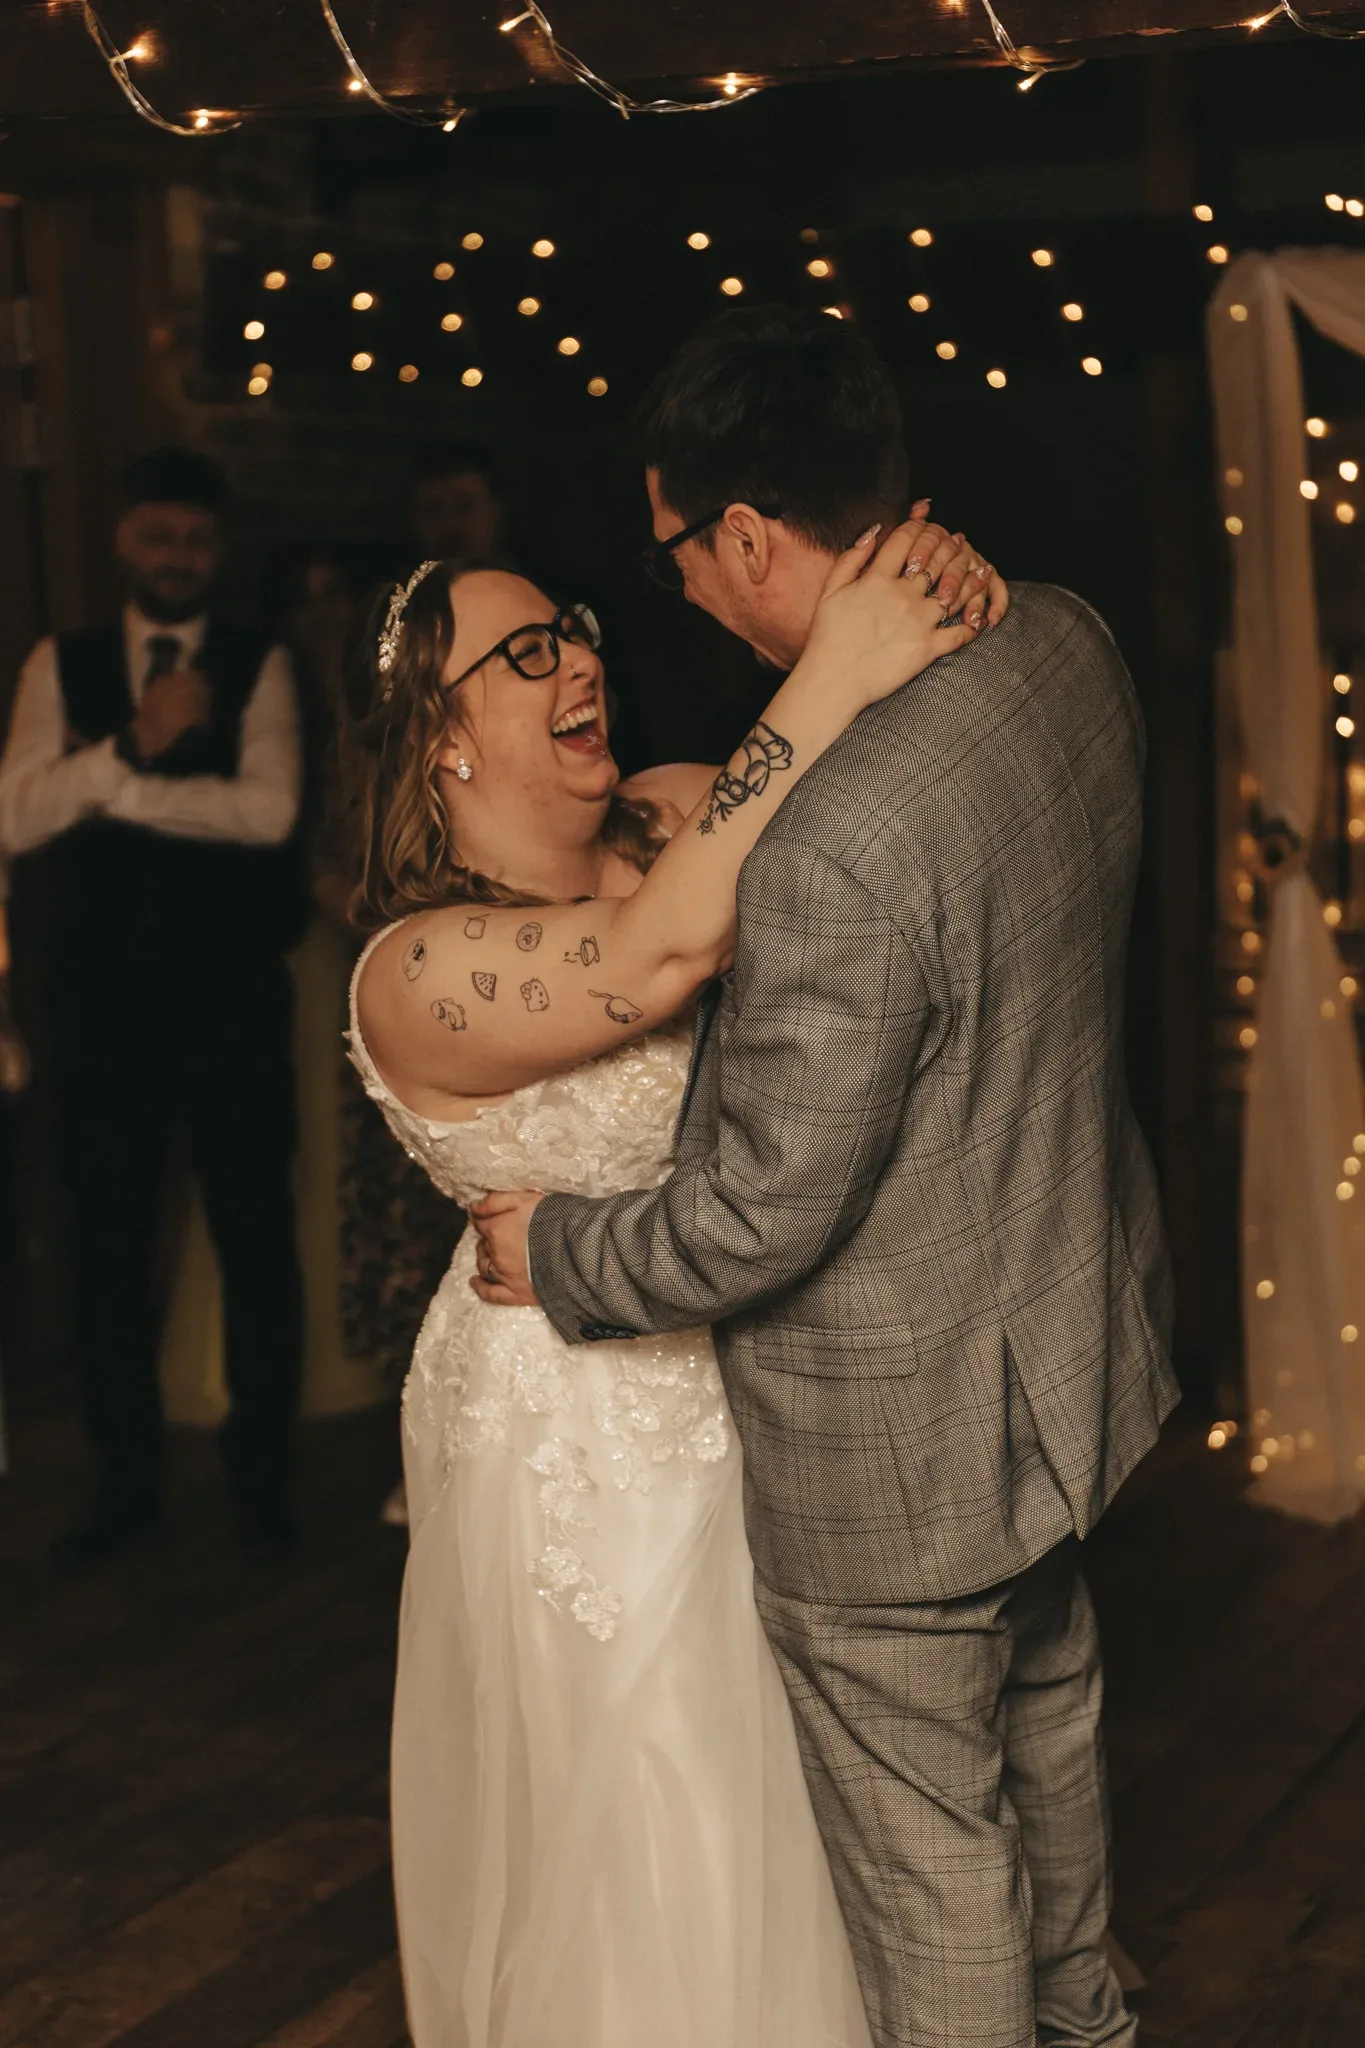 A joyful bride and groom share a heartfelt dance under a canopy of twinkling lights, surrounded by the warm ambiance of their wedding celebration.